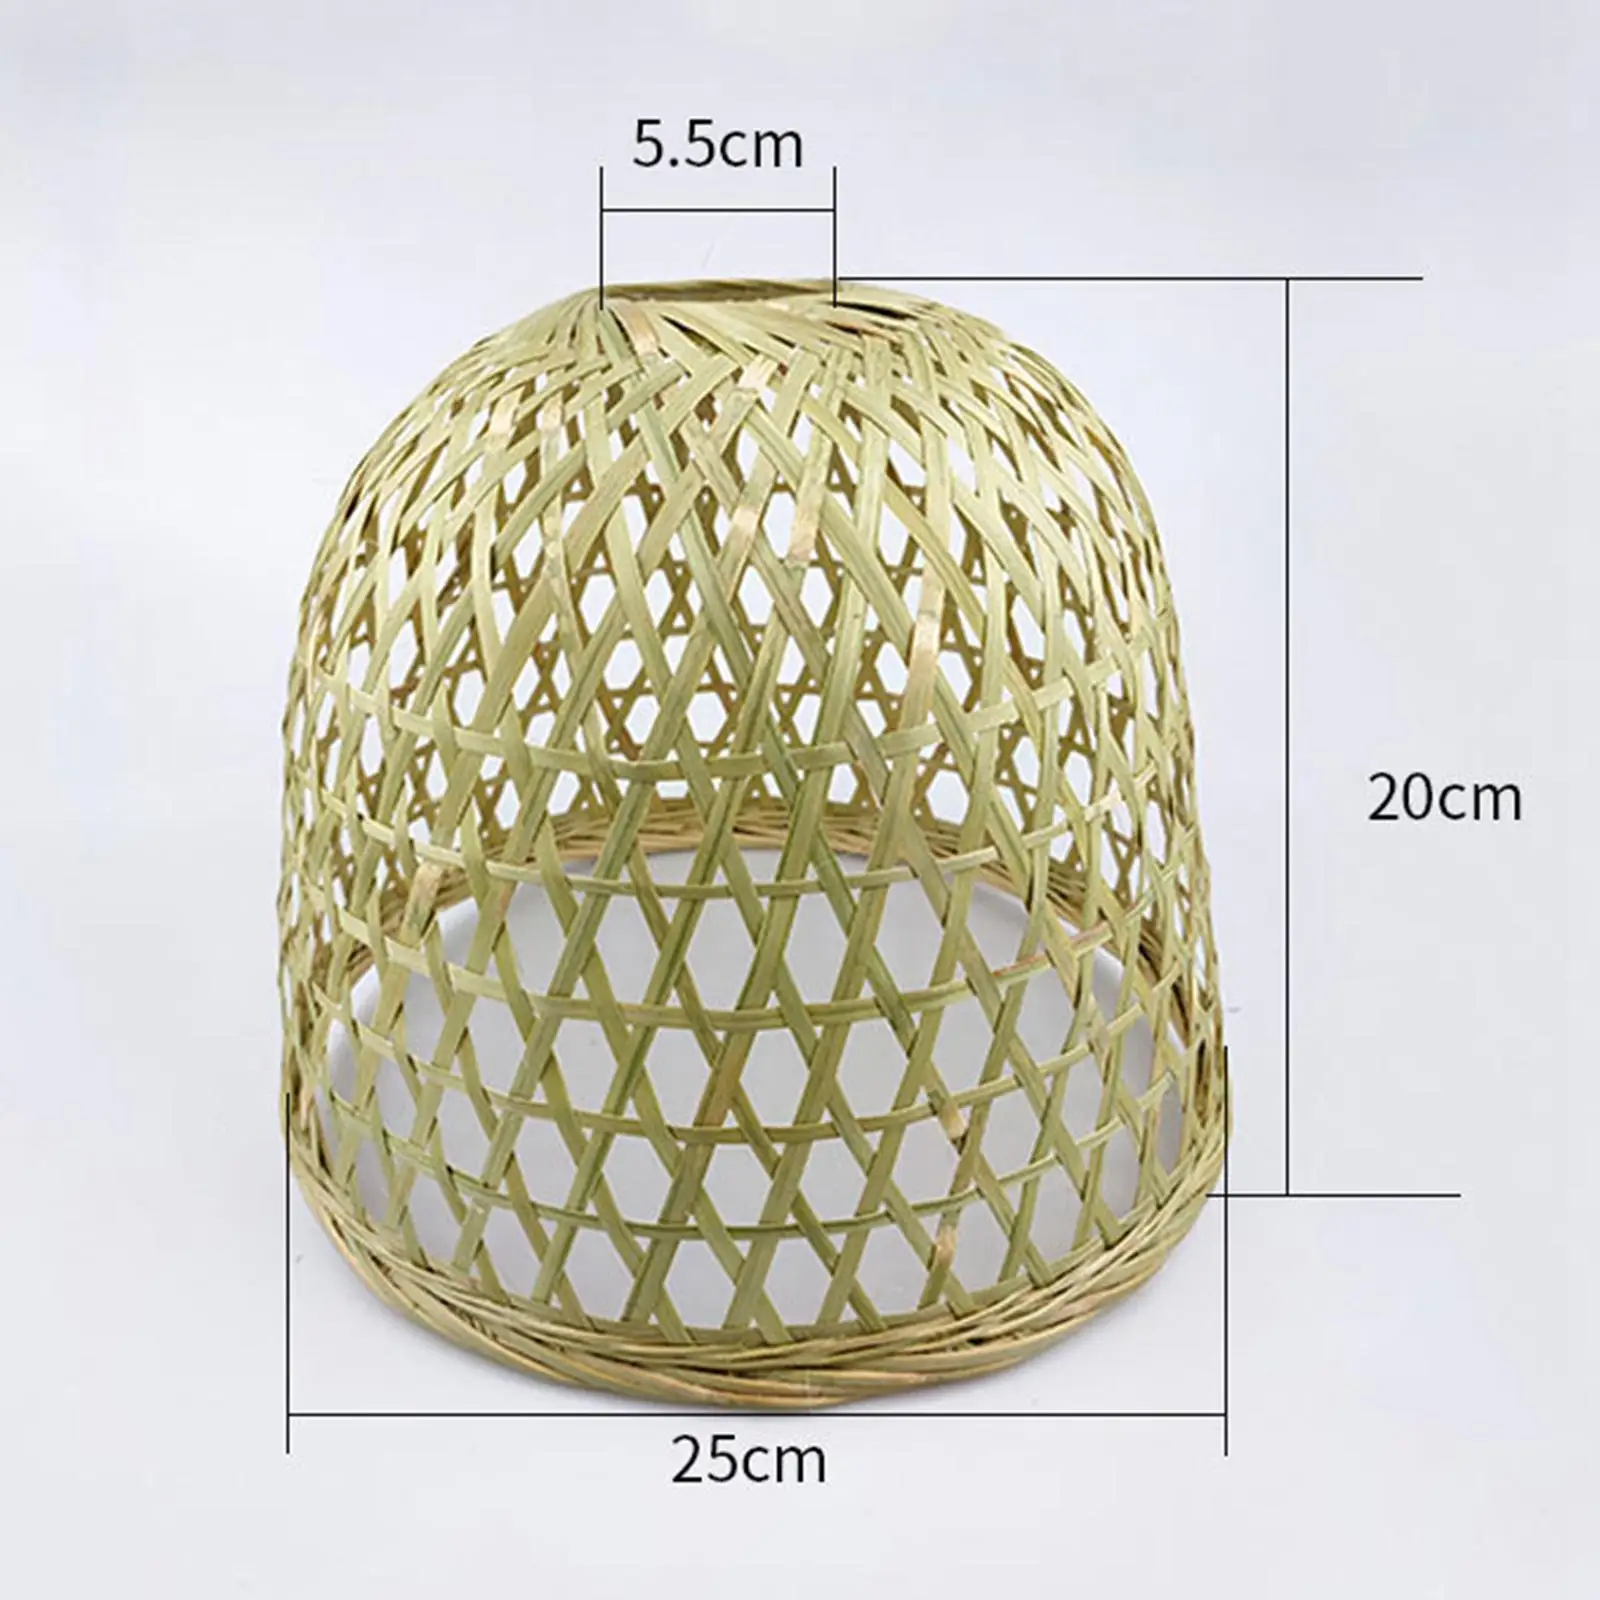 Bamboo Woven Hanging Chandelier Lampshade Handwoven Rustic Durable Domed Shape Easy Install for Restaurant Hotel Dining Room